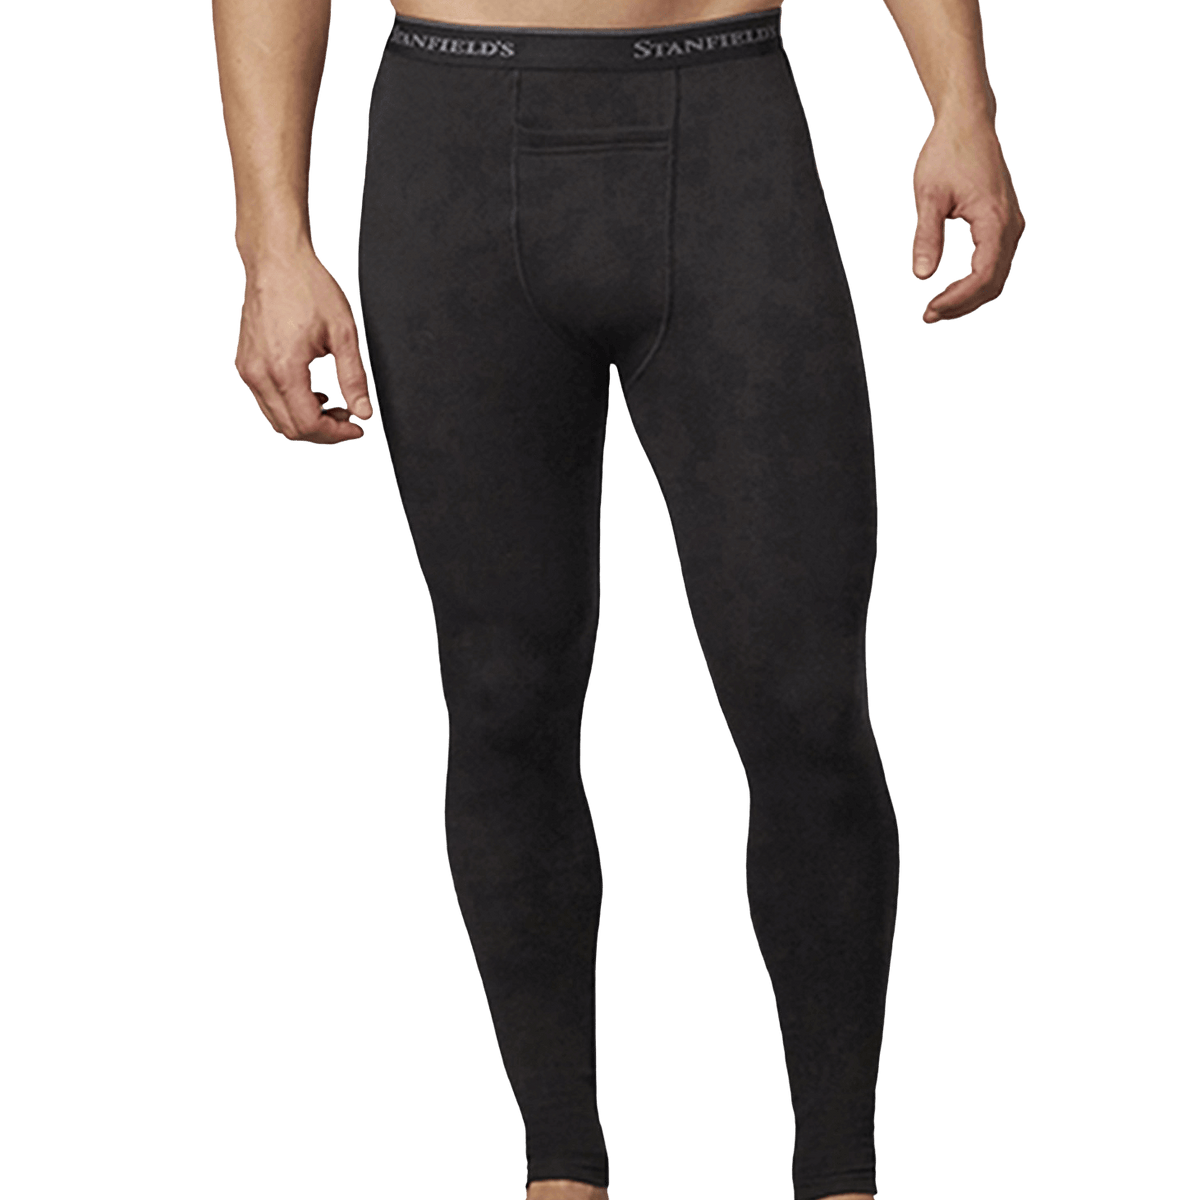 Men's Long Underwear Expedition Collection